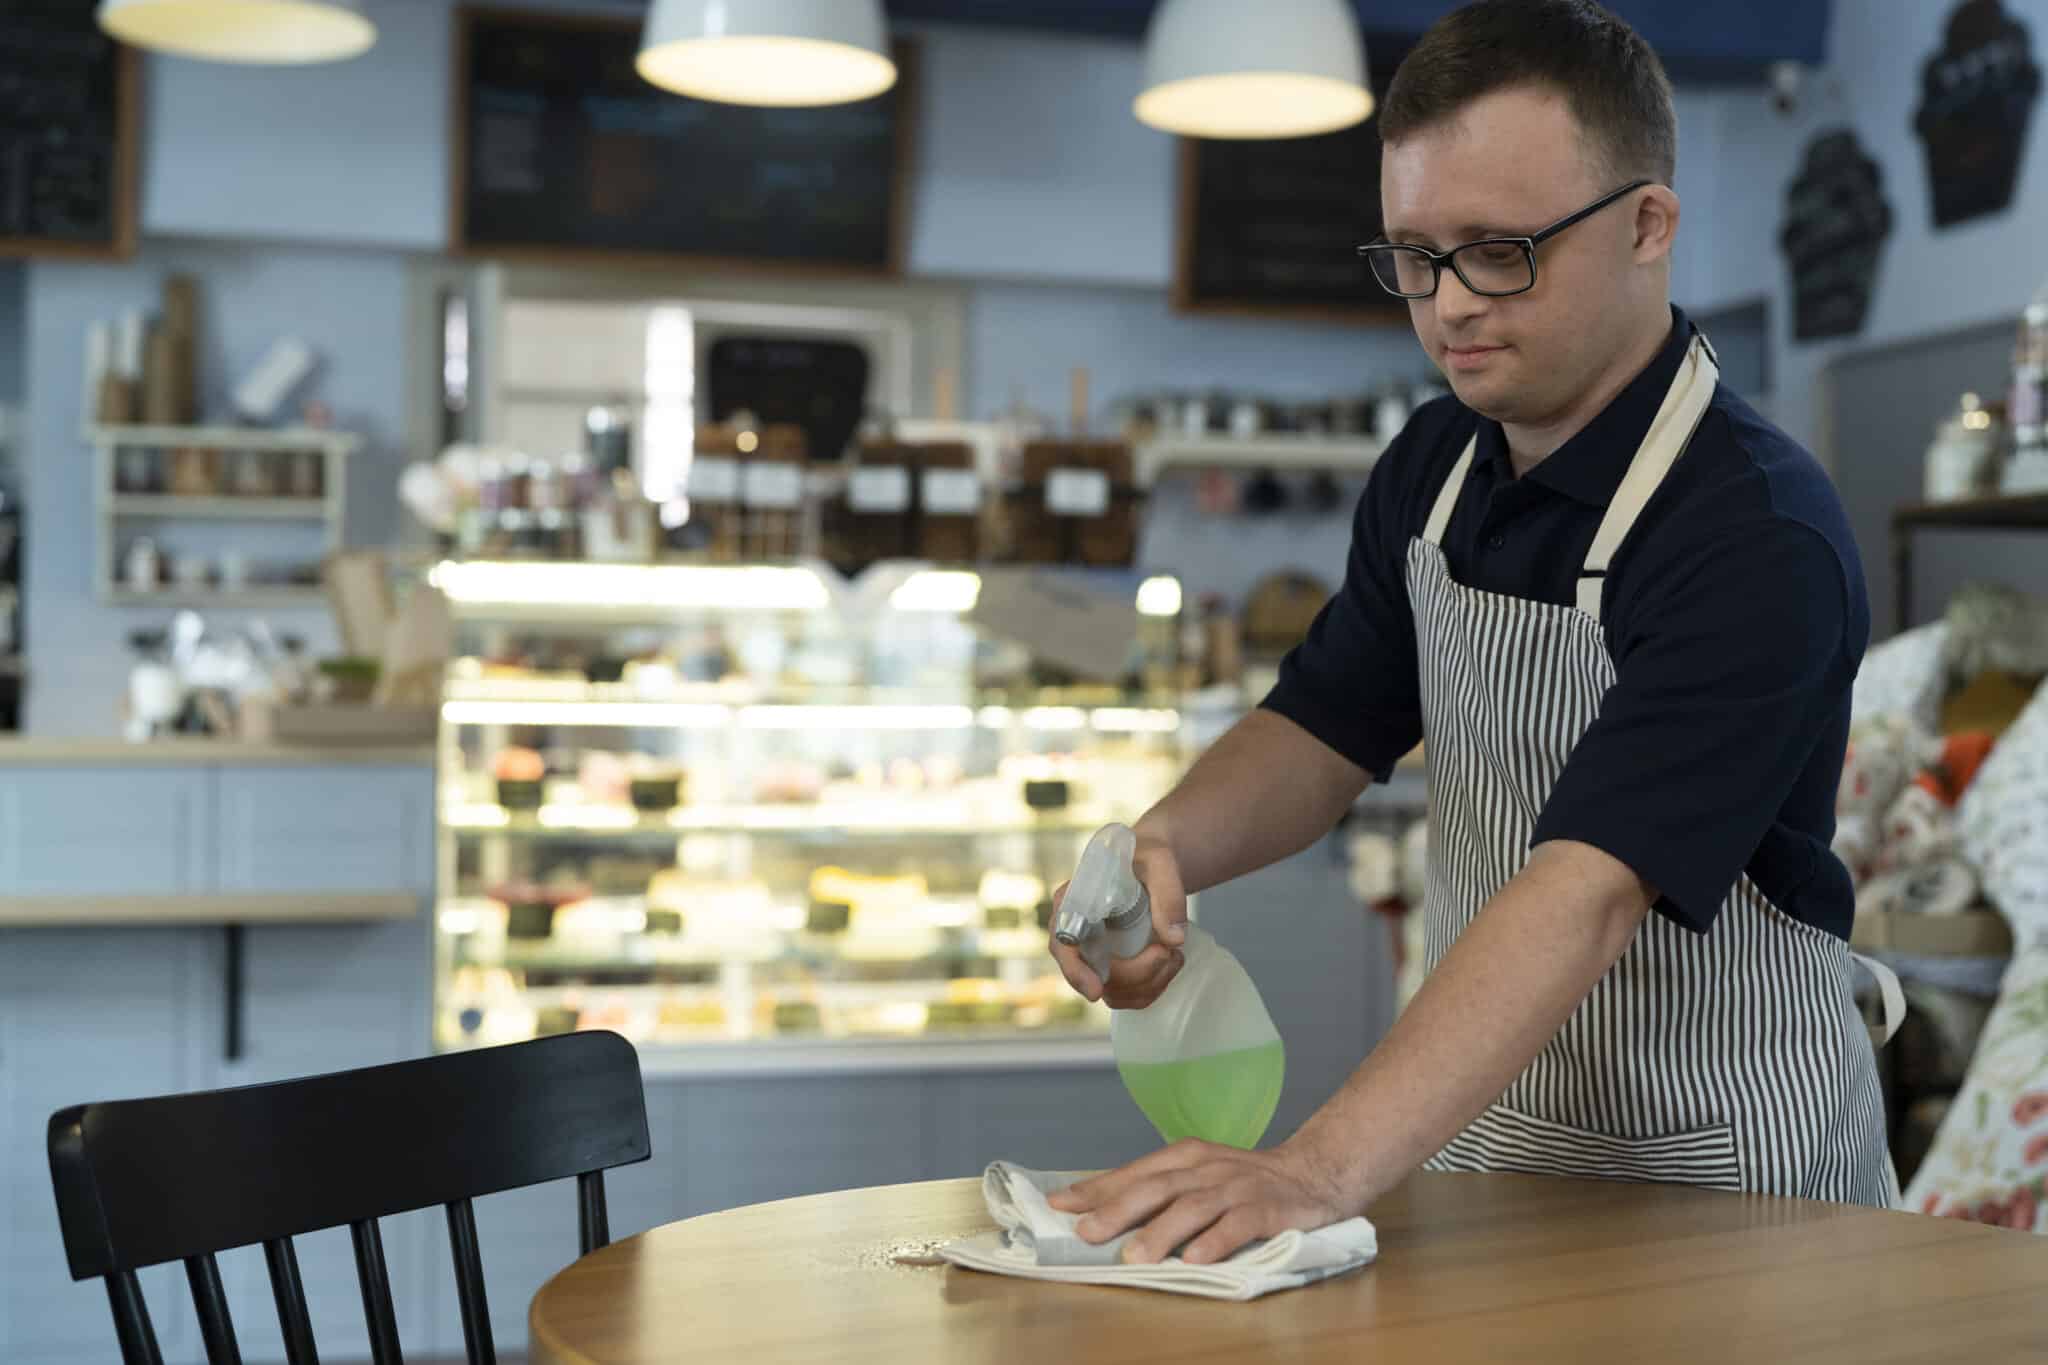 Caucasian man with down syndrome cleaning table in the cafe